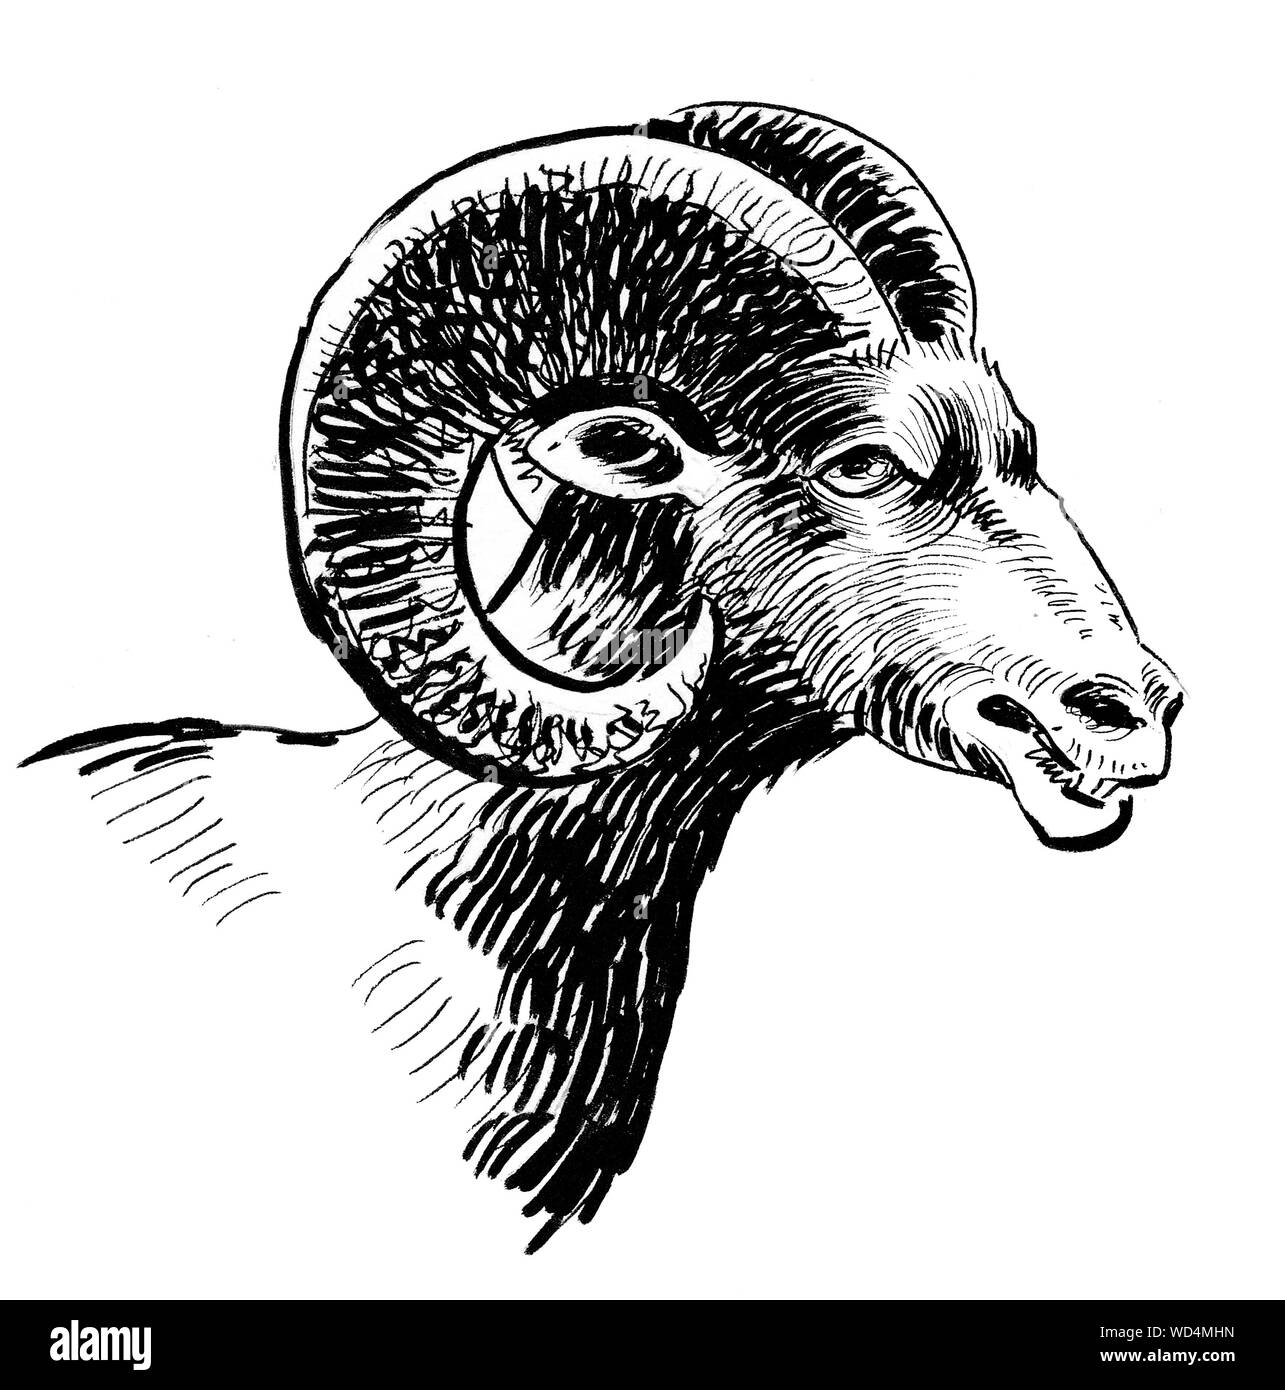 Ram head. Ink black and white drawing Stock Photo - Alamy